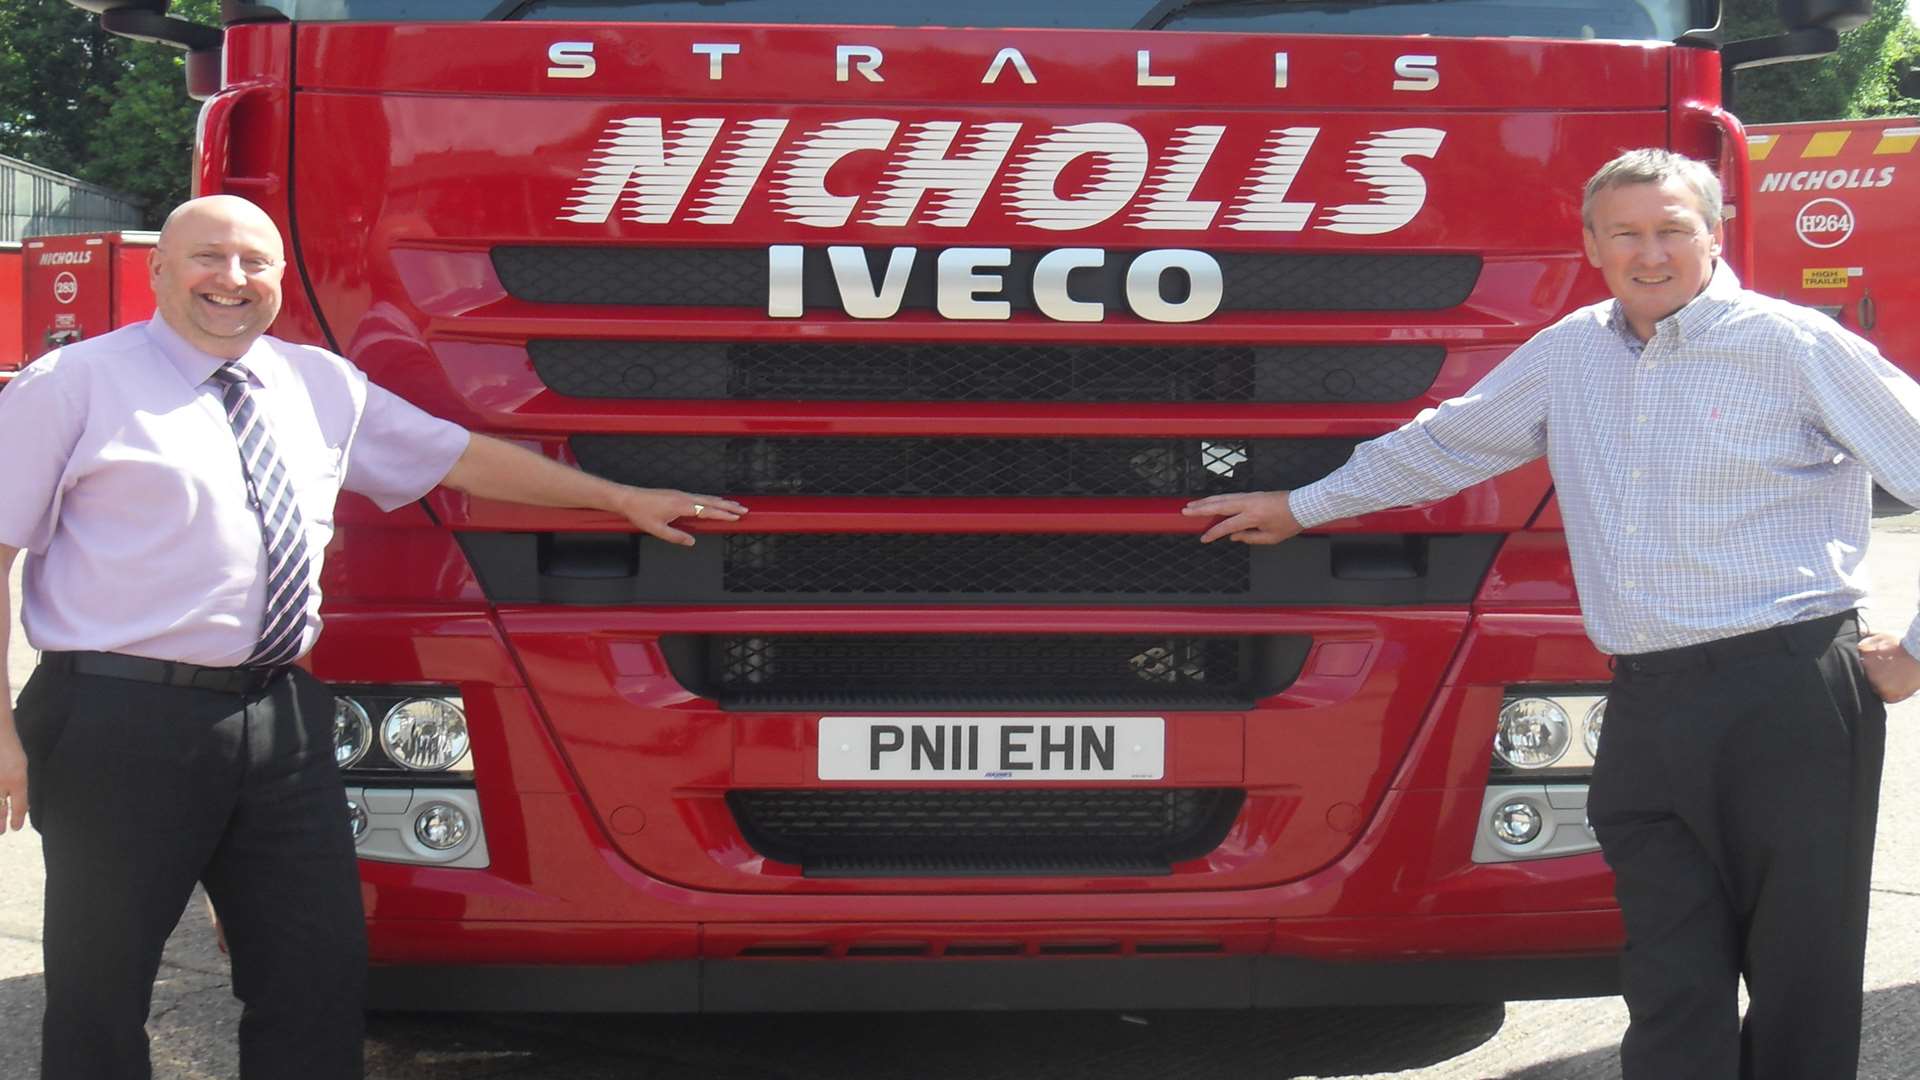 Nicholls Transport, owned by managing director Paul Nicholls, right, has half its fleet affected by Operation Stack